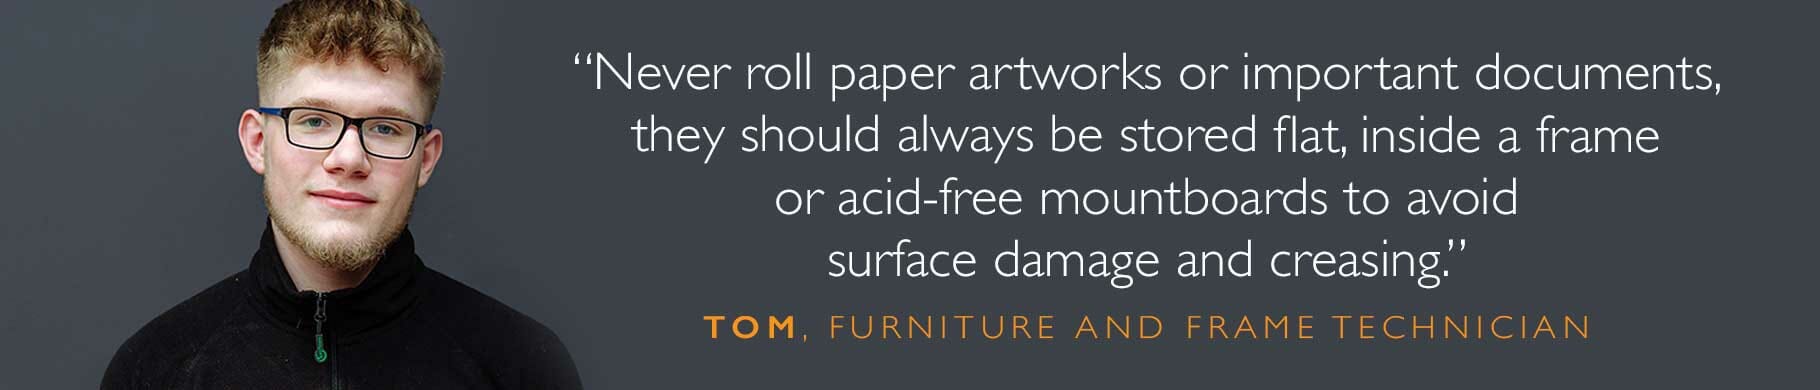 tom quote about never rolling paper artwork